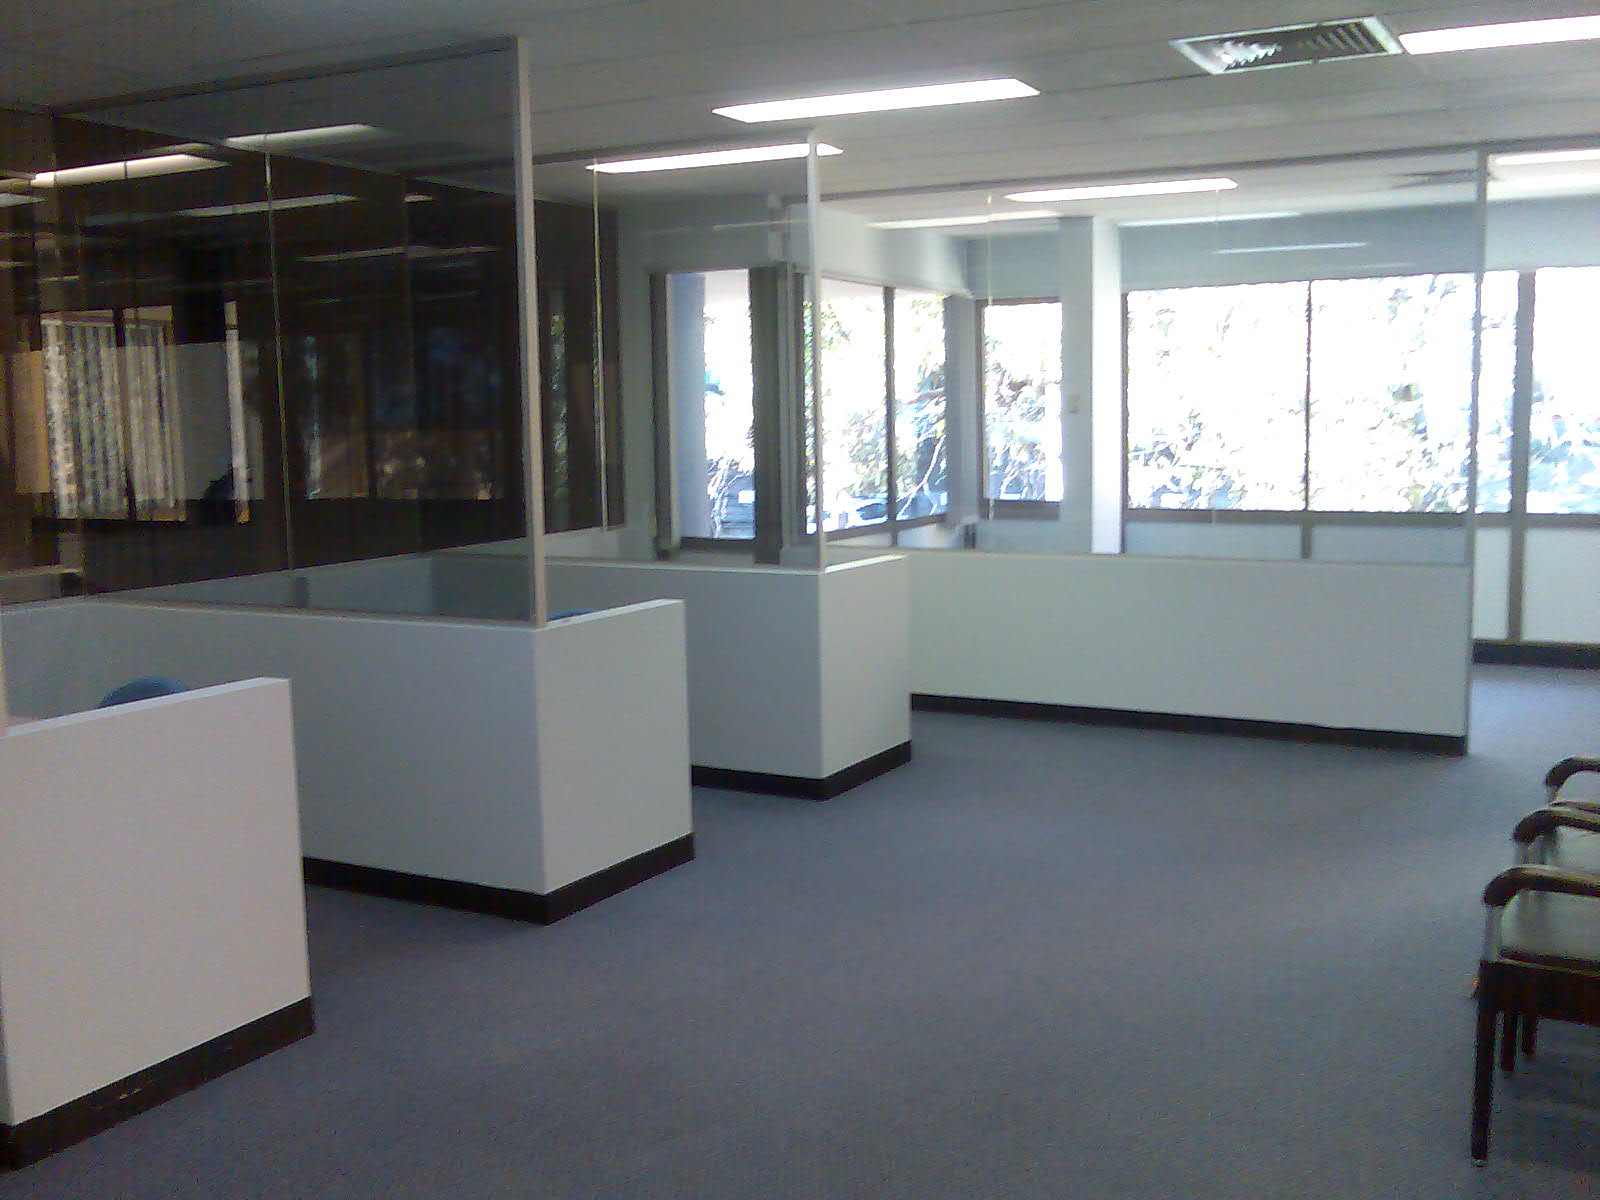 Industrial property for lease in macquarie park 1